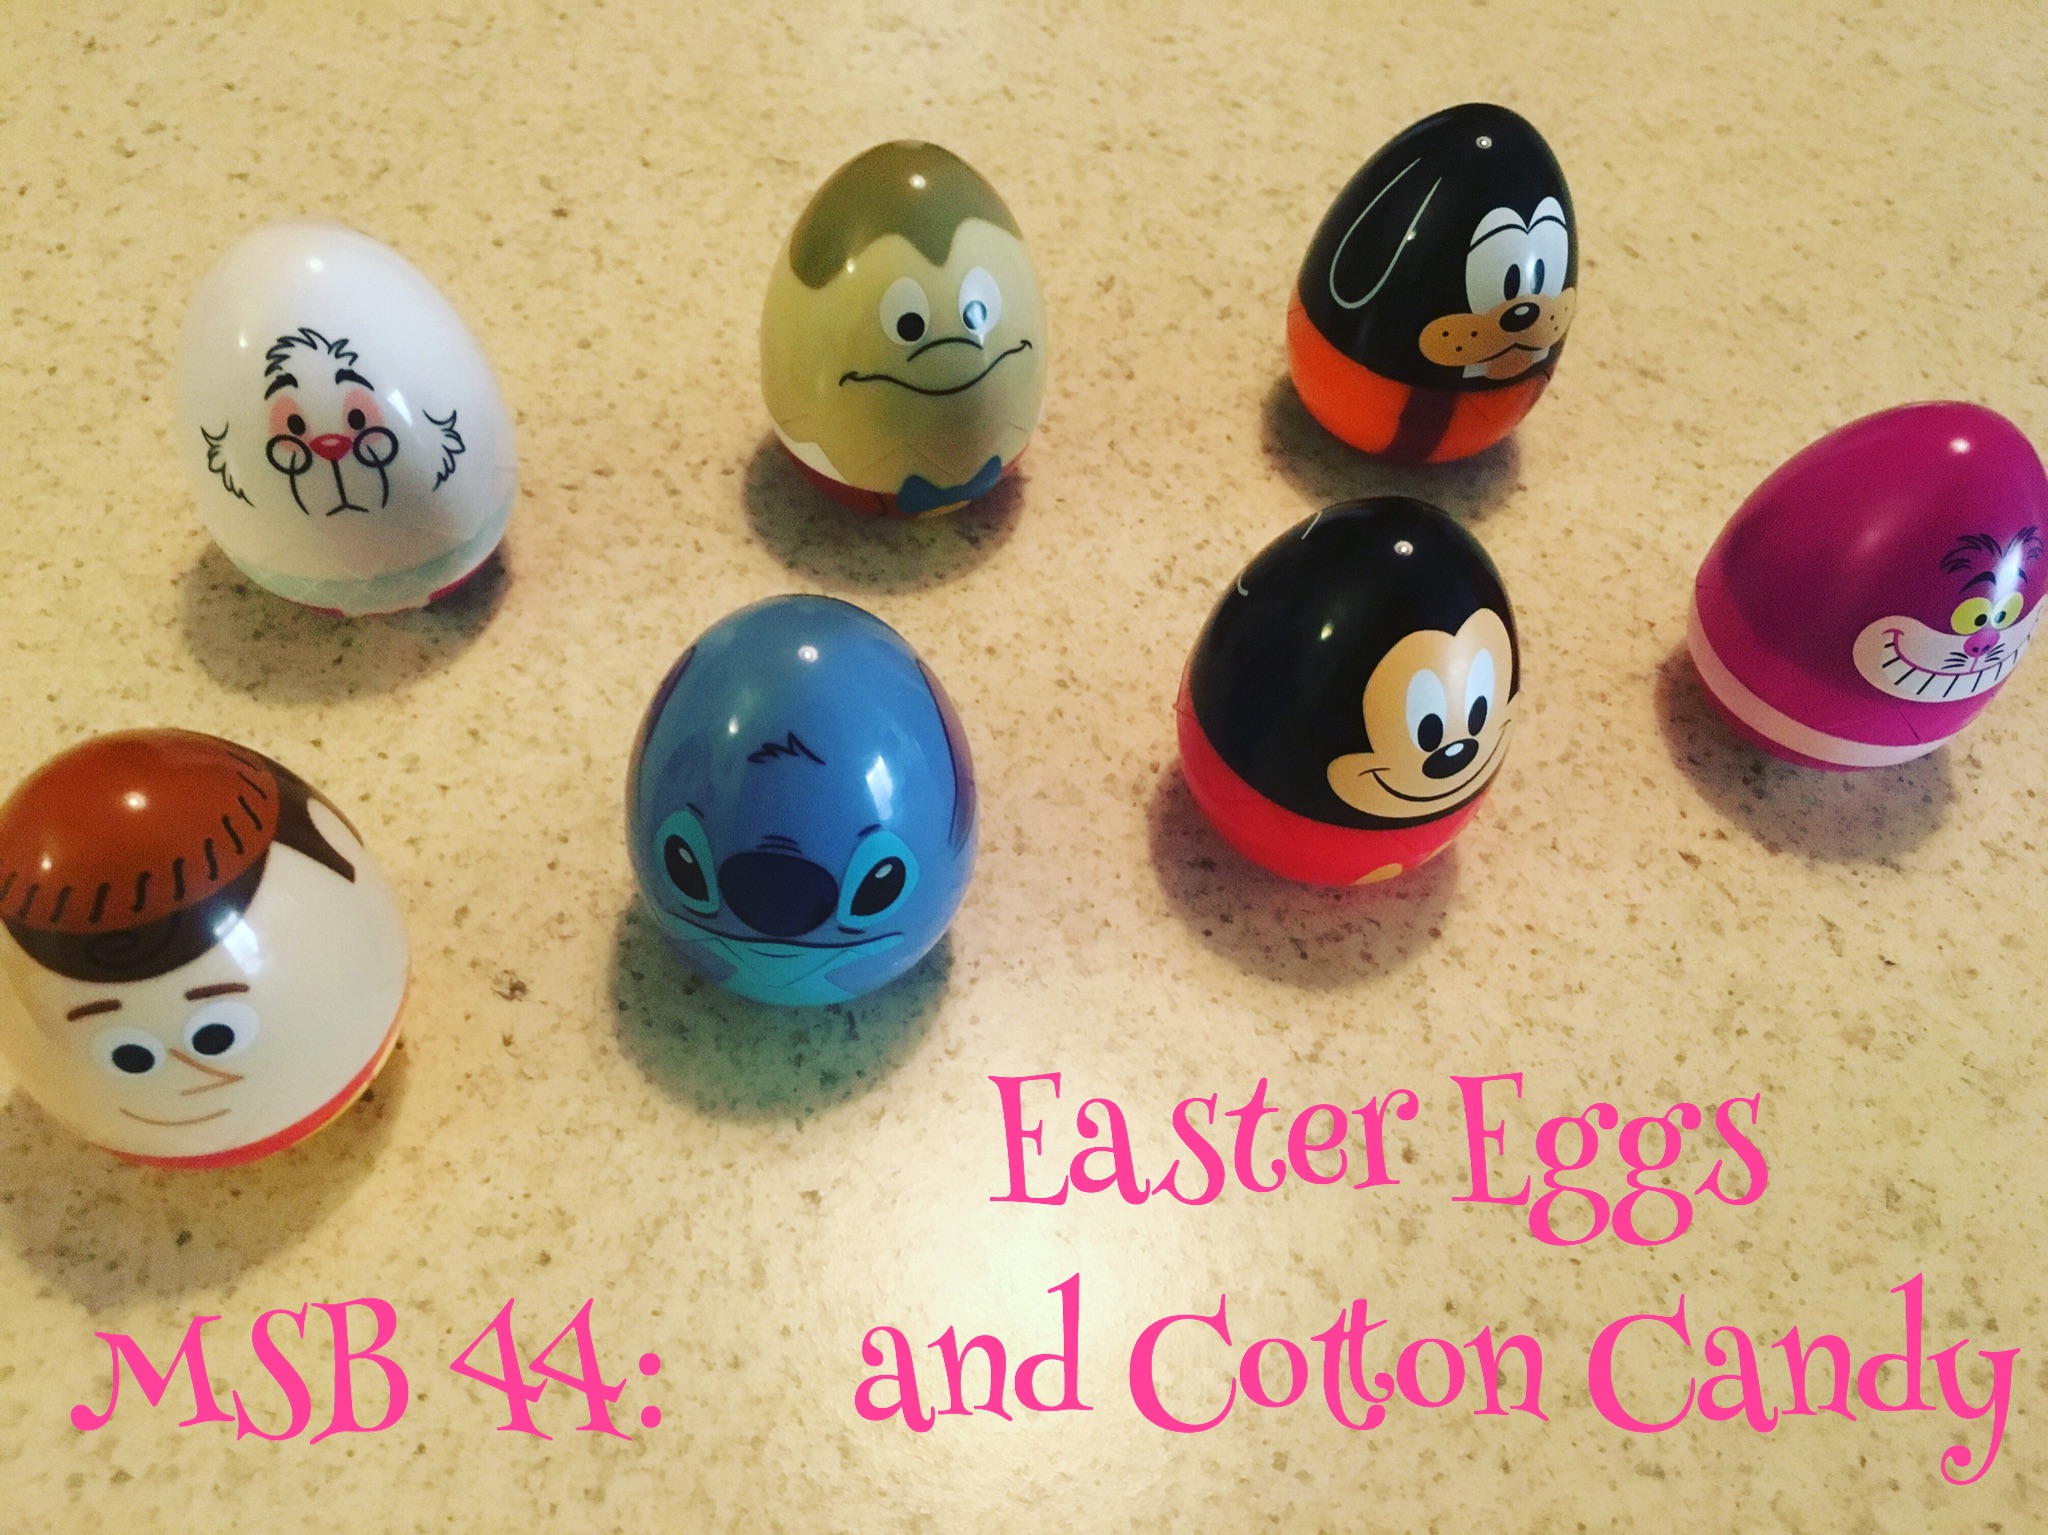 MSB Episode 44: Easter Eggs and Cotton Candy